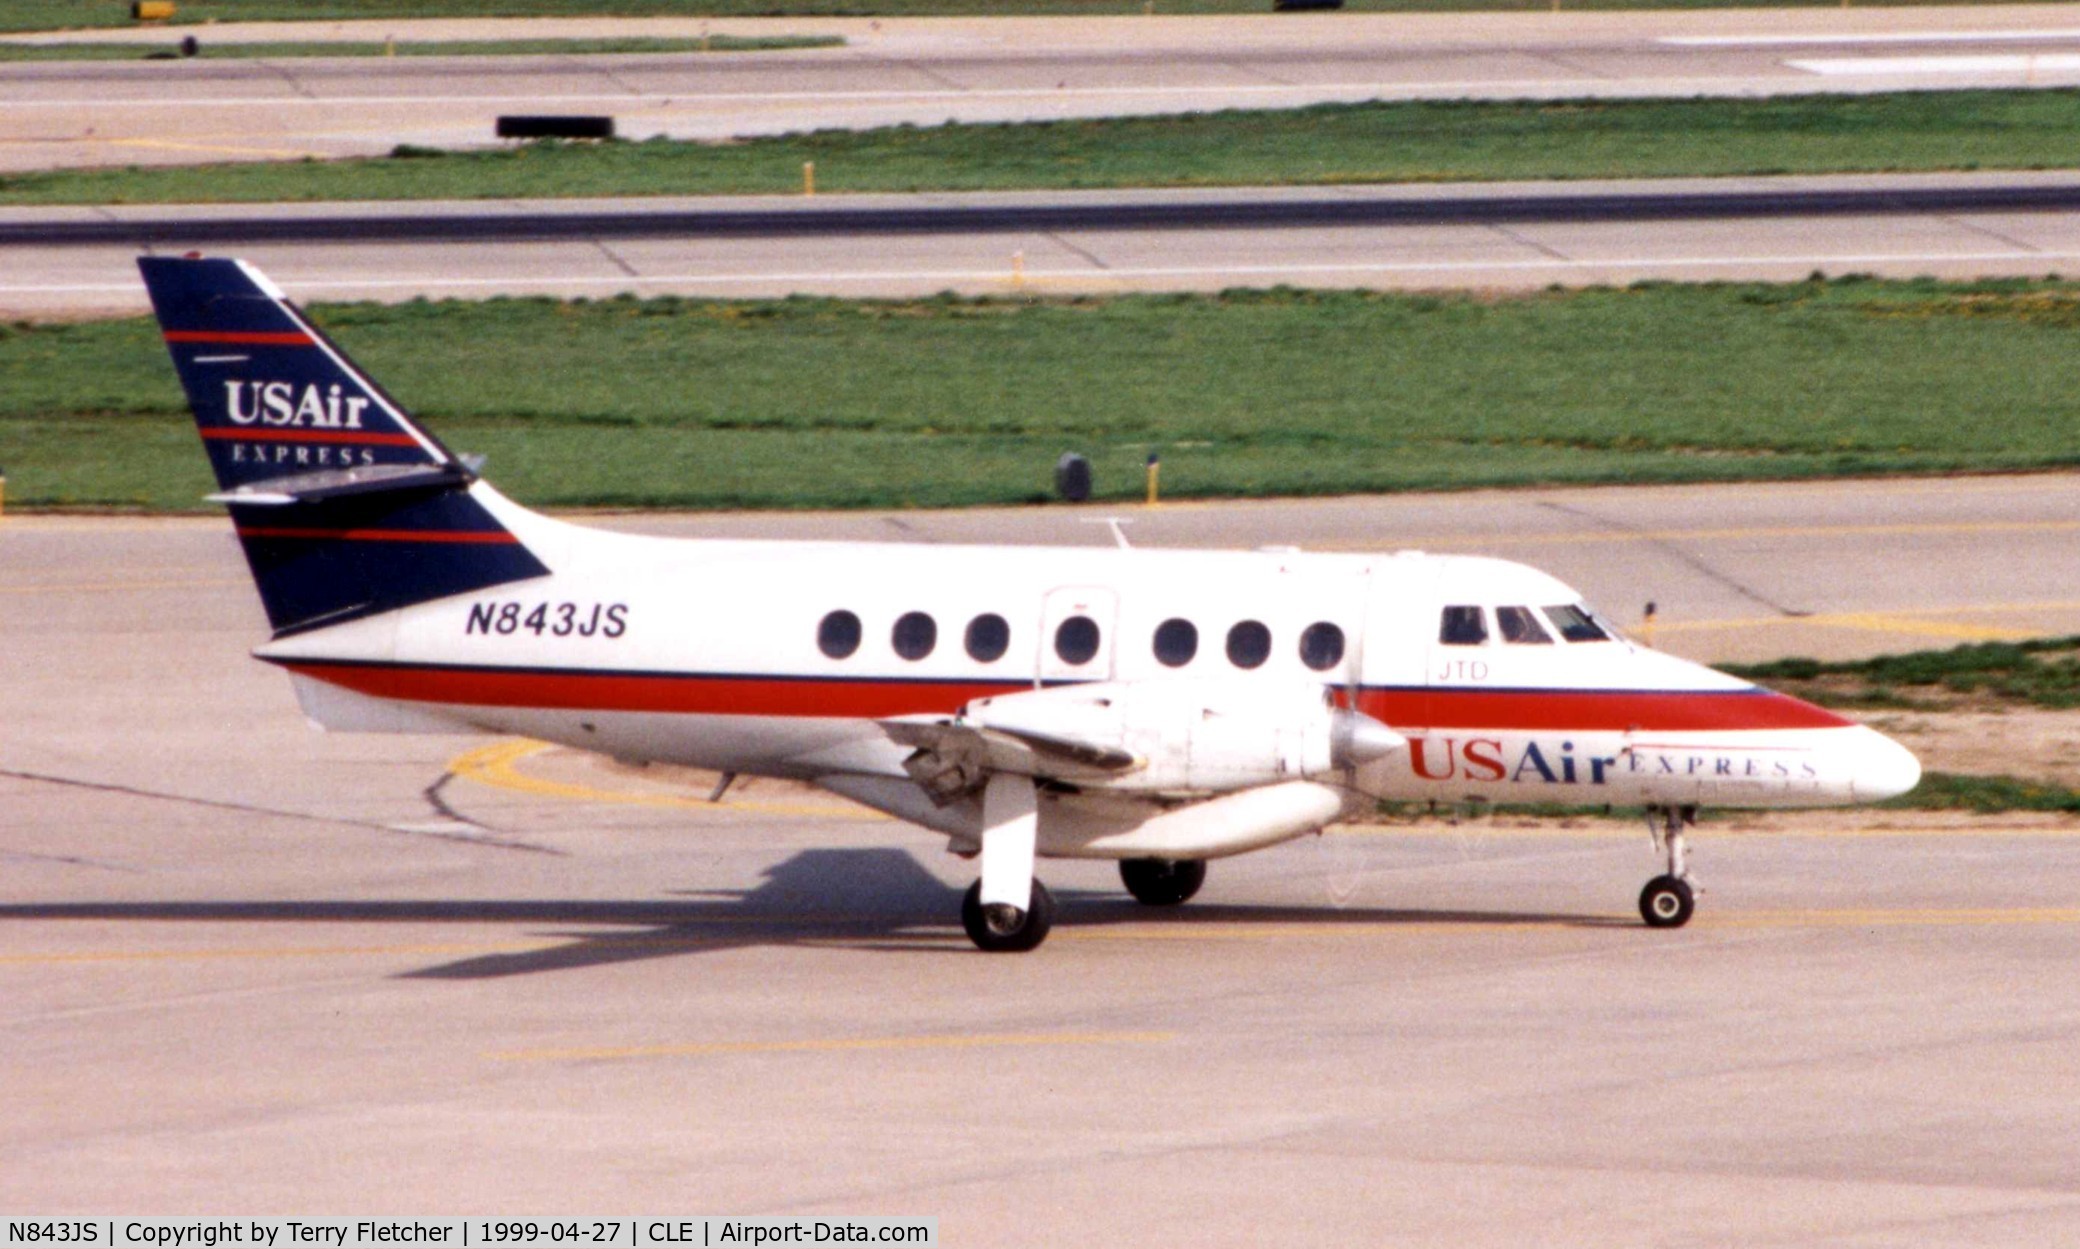 N843JS, 1987 British Aerospace BAe Jetstream 3101 C/N 757, Jetstream of US Air Express  subsequently became HR-ATE